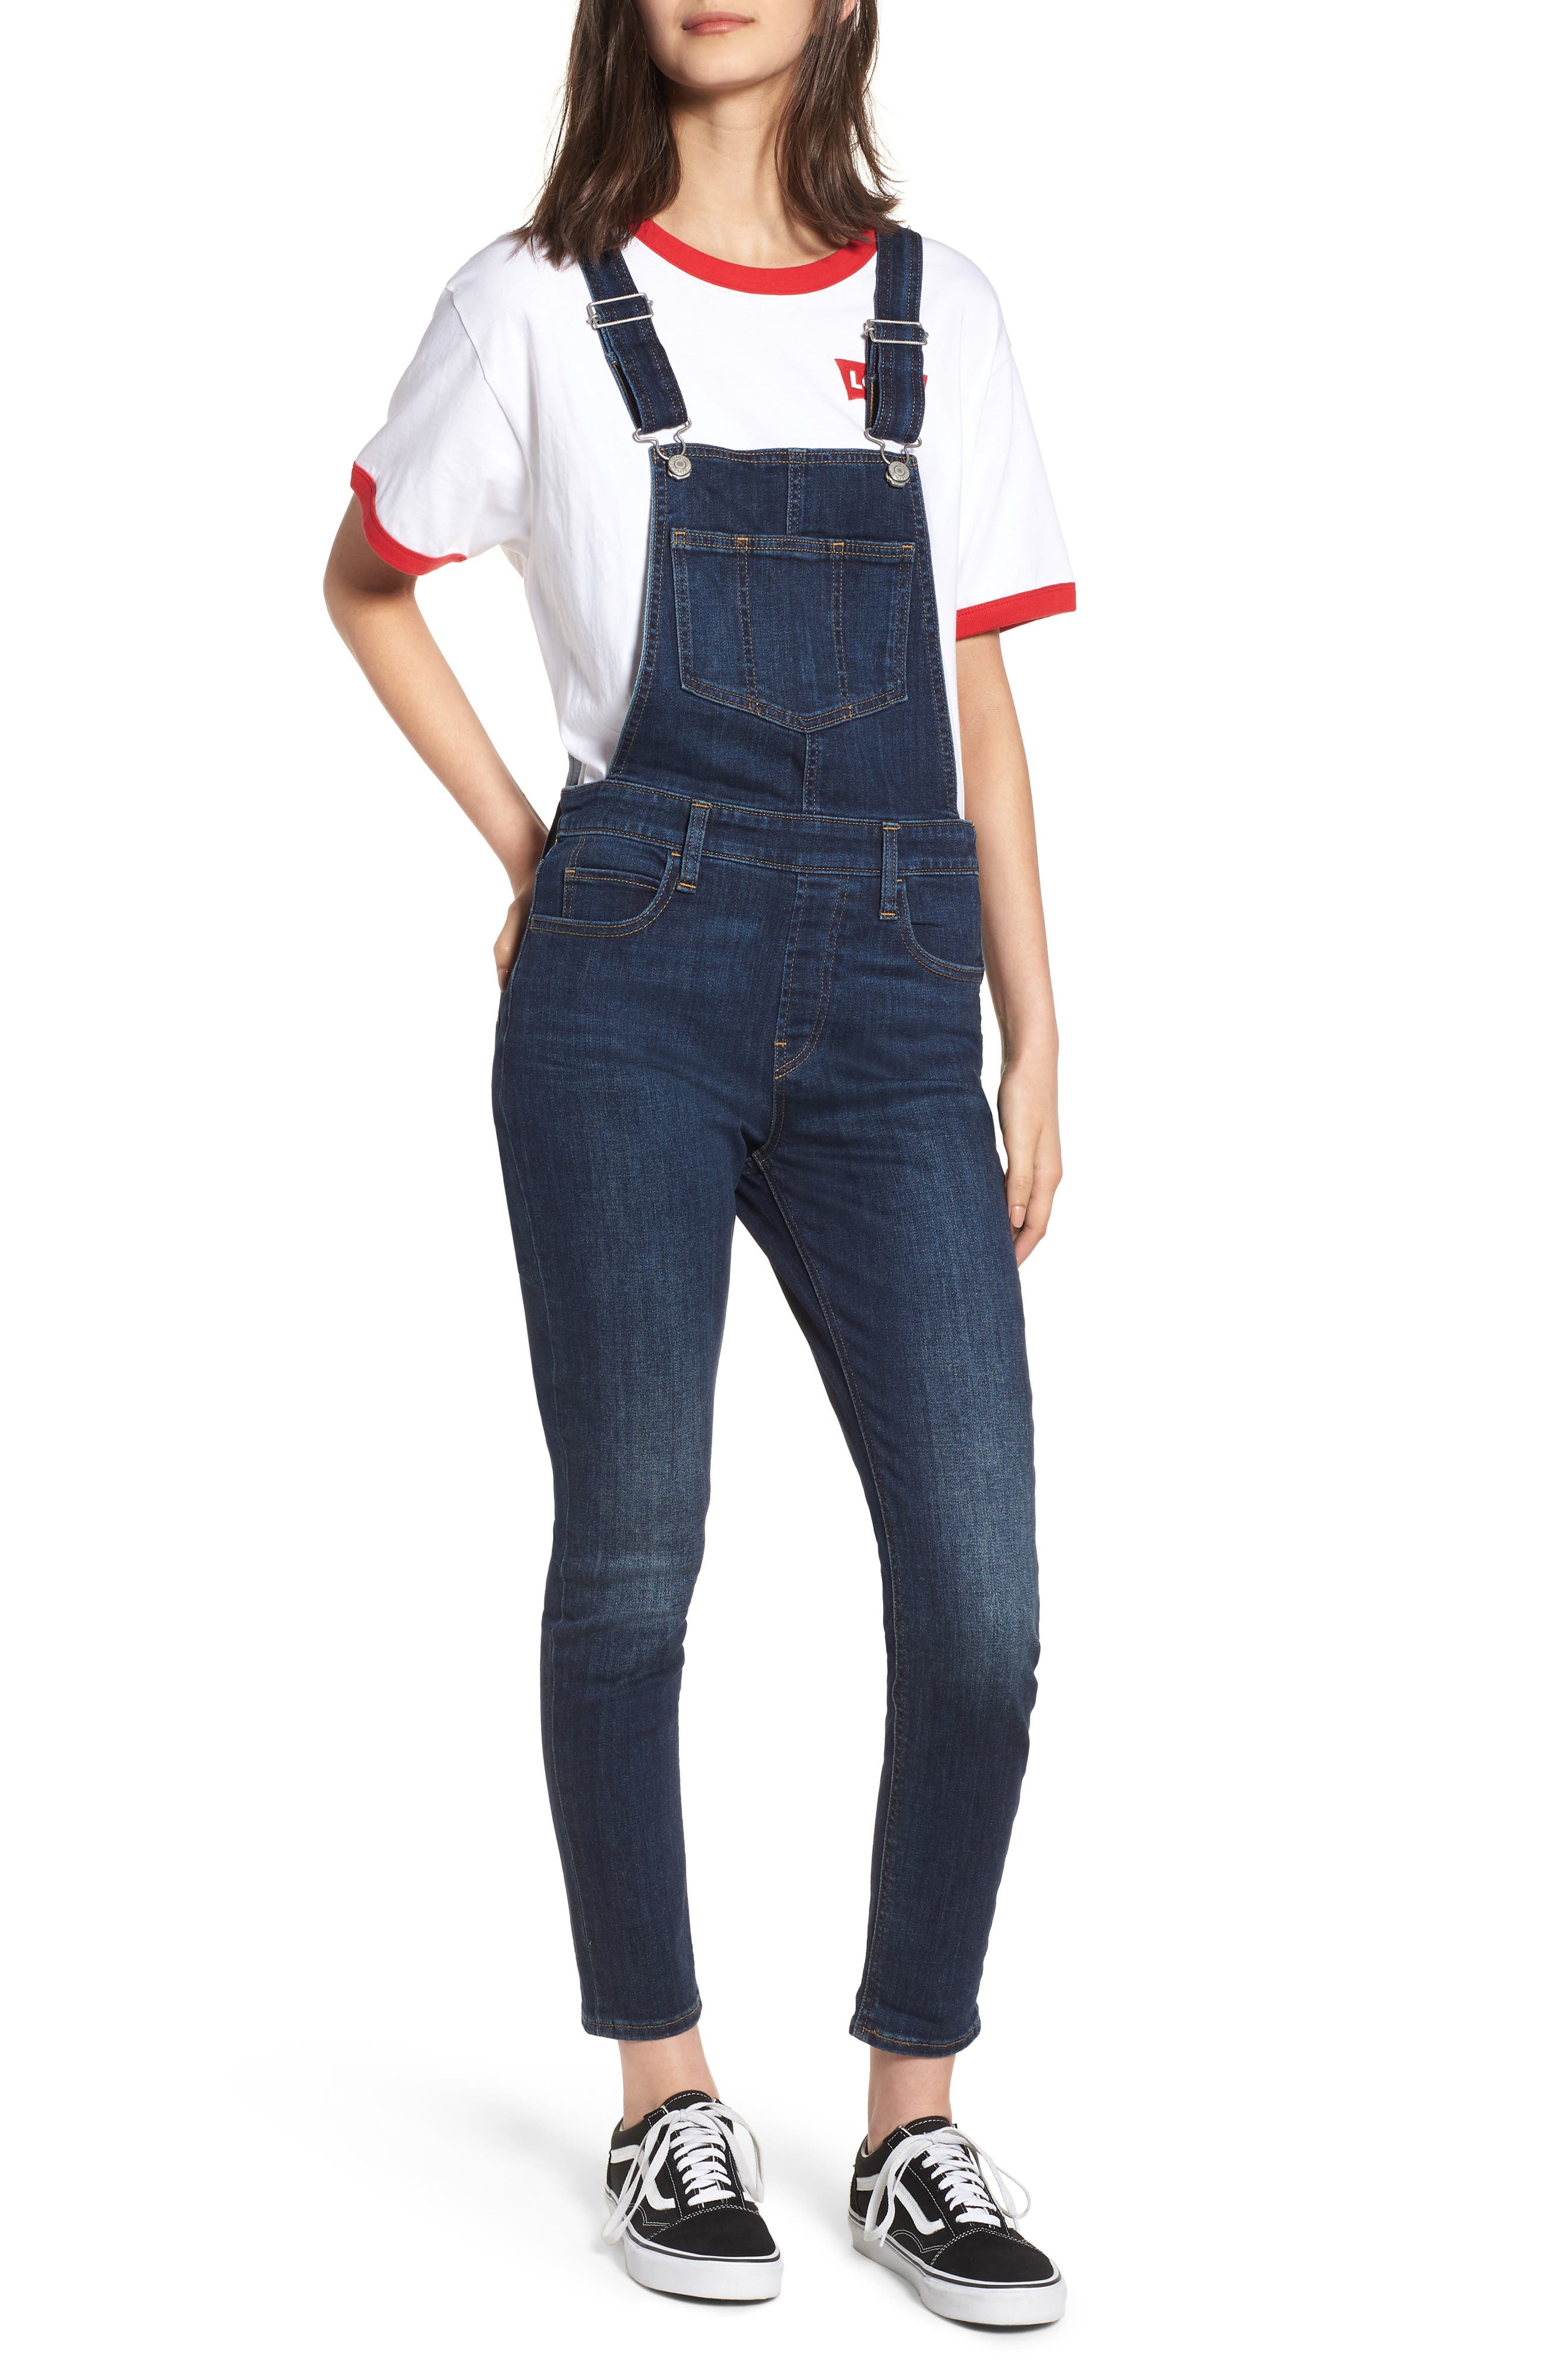 Levi's Skinny Overalls Over And Out on Sale, 58% OFF 